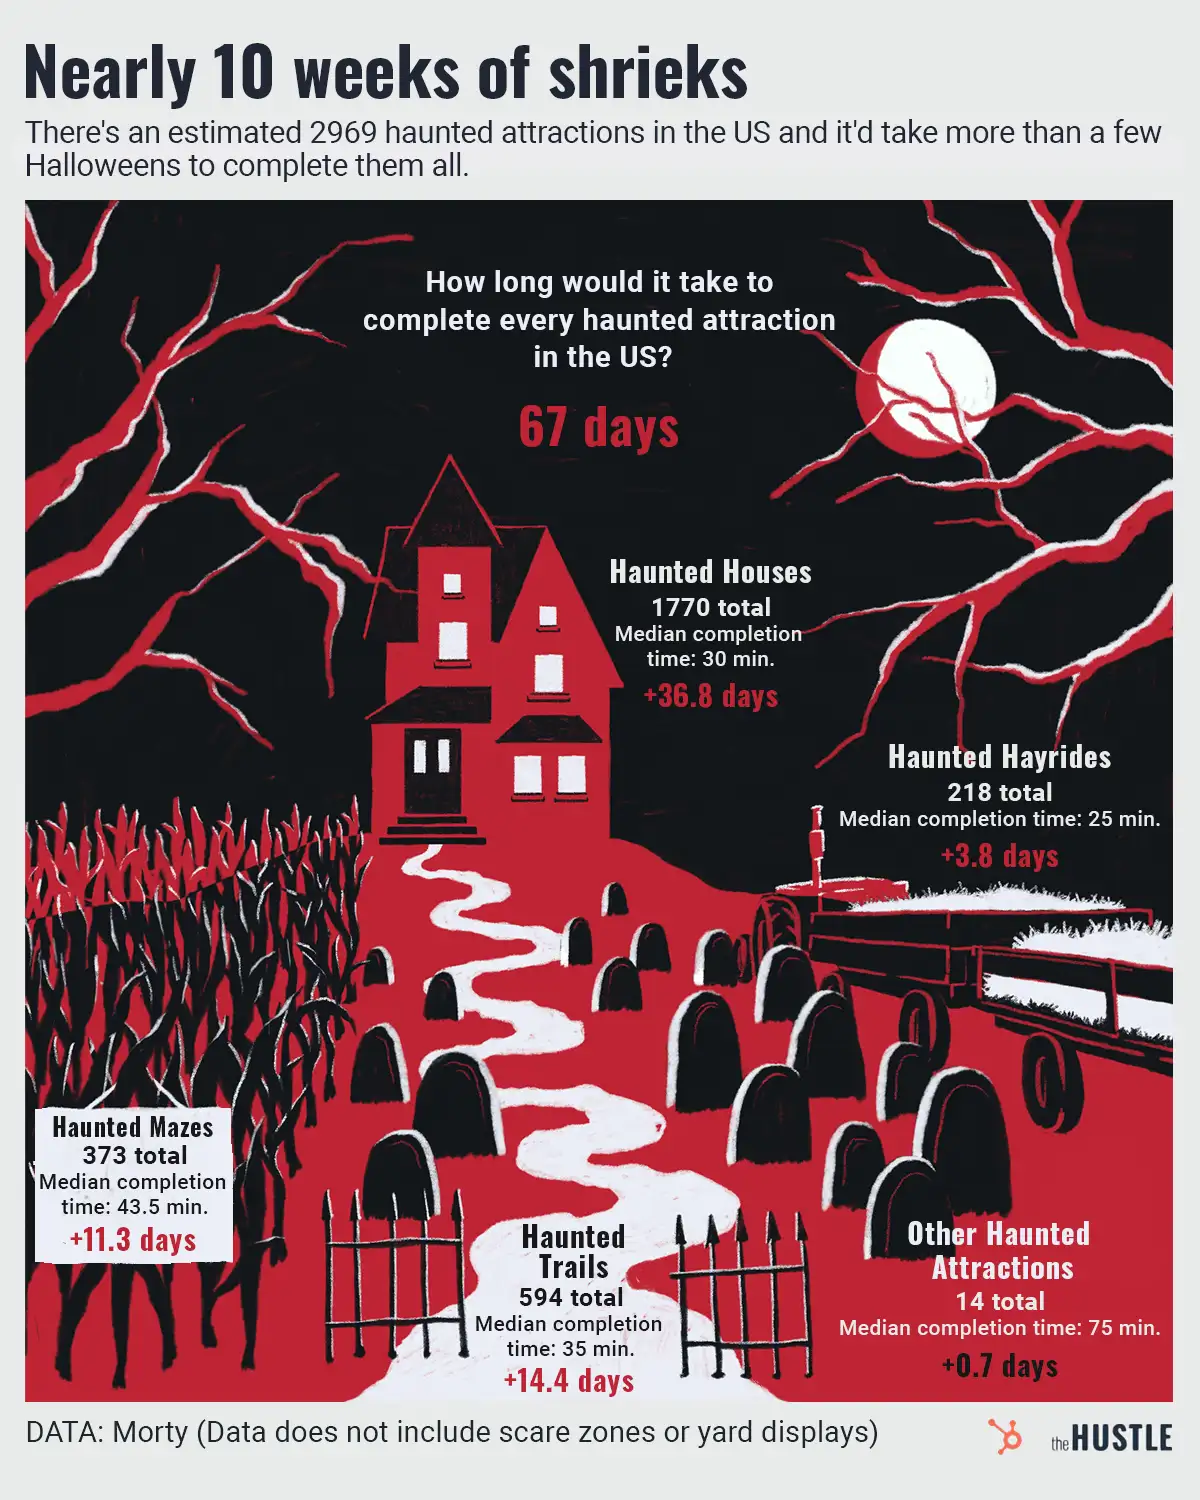 How to find the best haunt this Halloween